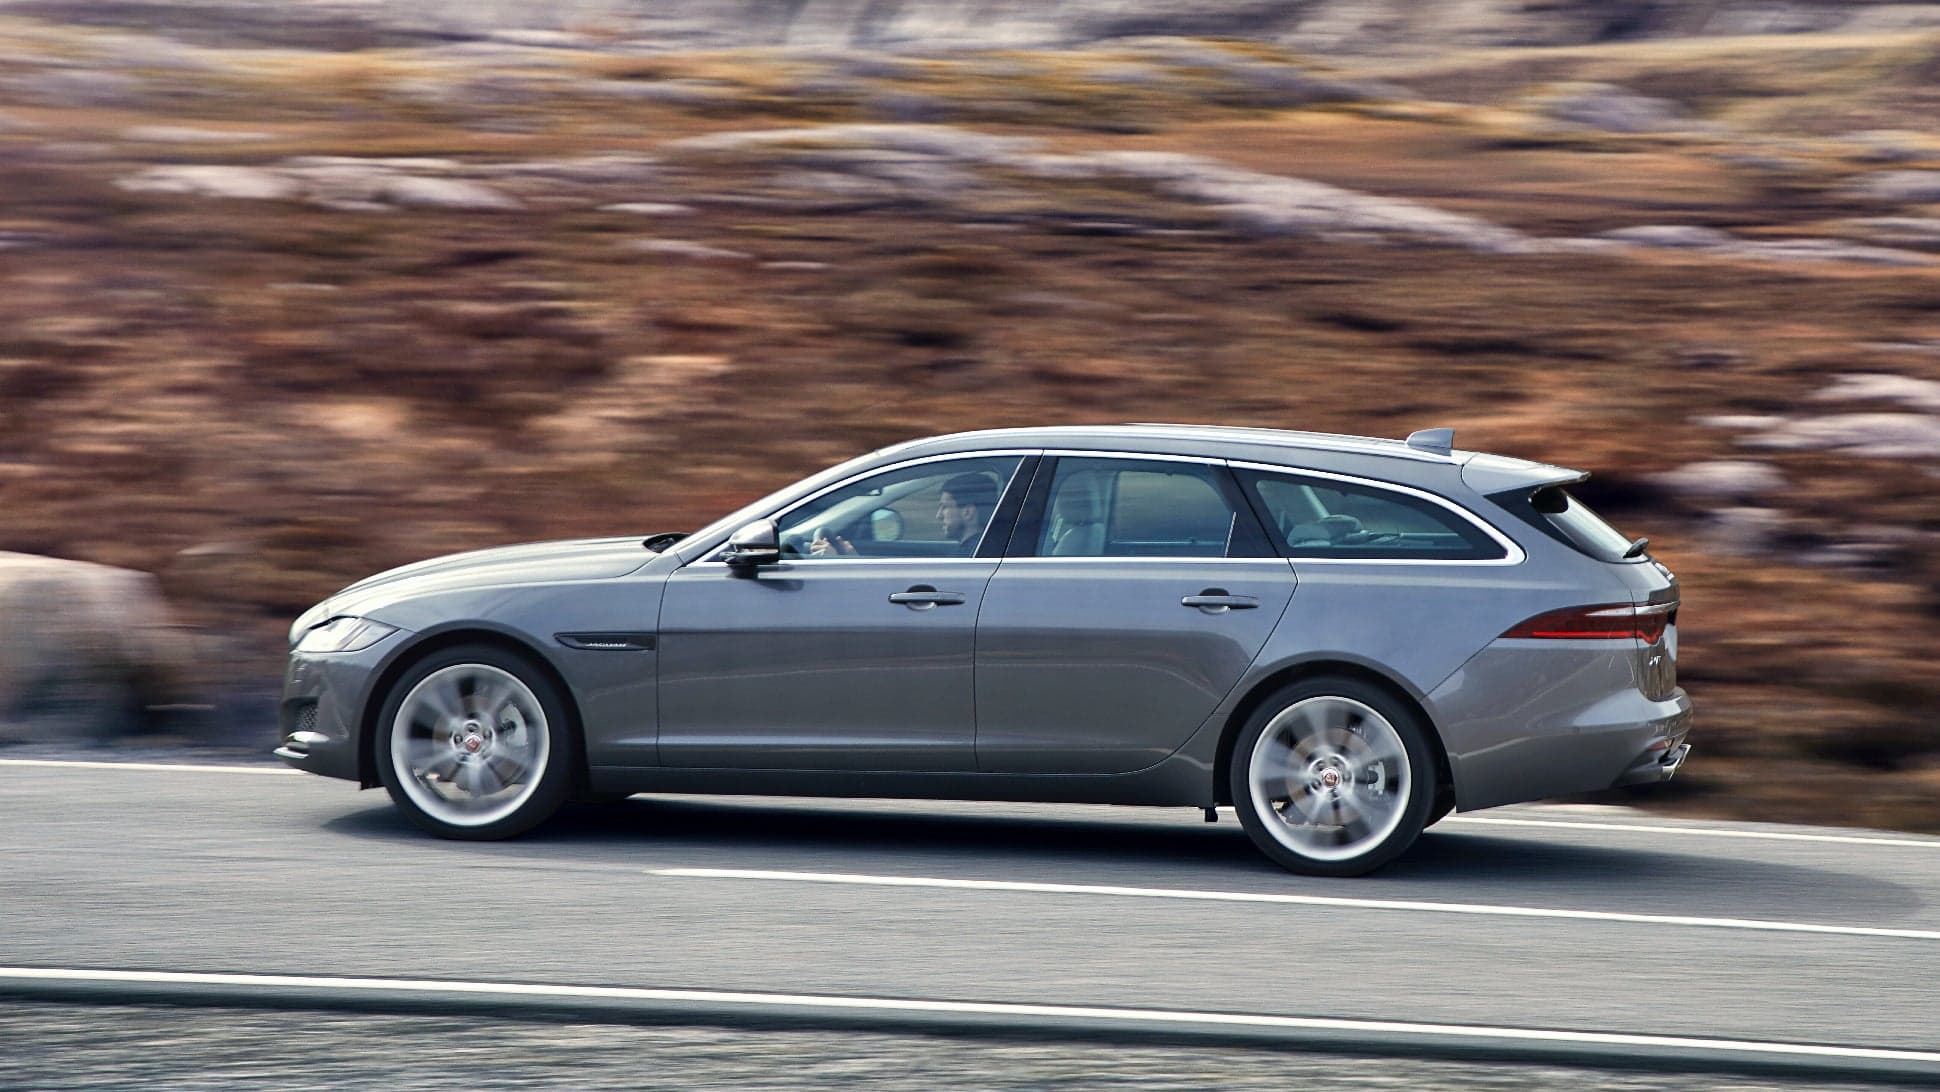 Jaguar XF Sportbrake Is Dead in the US Because We Can’t Have Wagons Unless You Buy Them